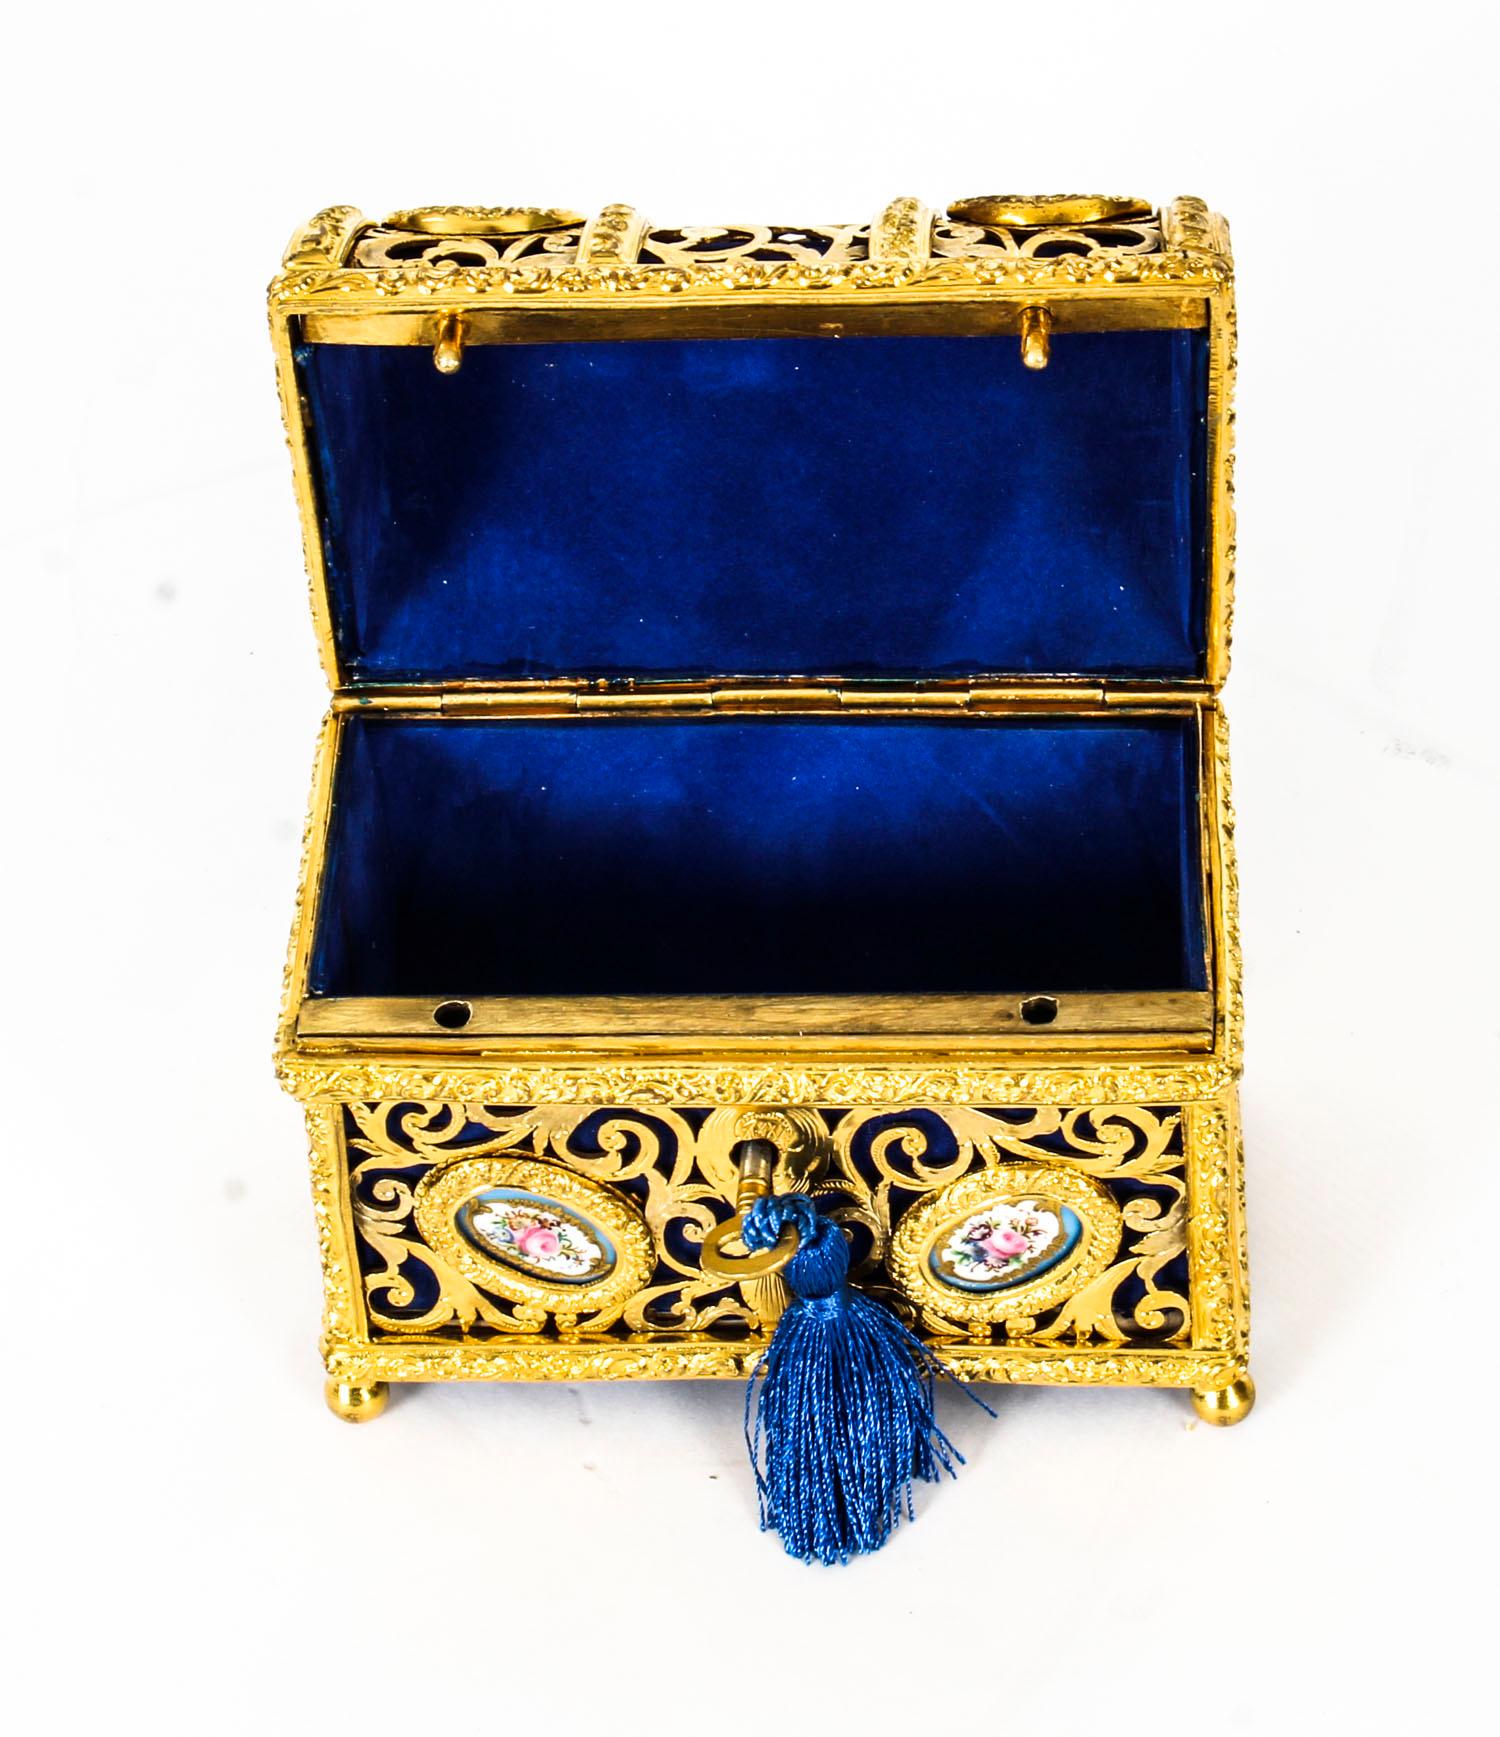 This is a stunning antique 19th century French Palais Royal gilt bronze and Sèvres porcelain mounted domed rectangular table casket, circa 1870 in date. 

The locking cover with swing handle, enclosing a Royal Blue velvet-lined interior, the whole